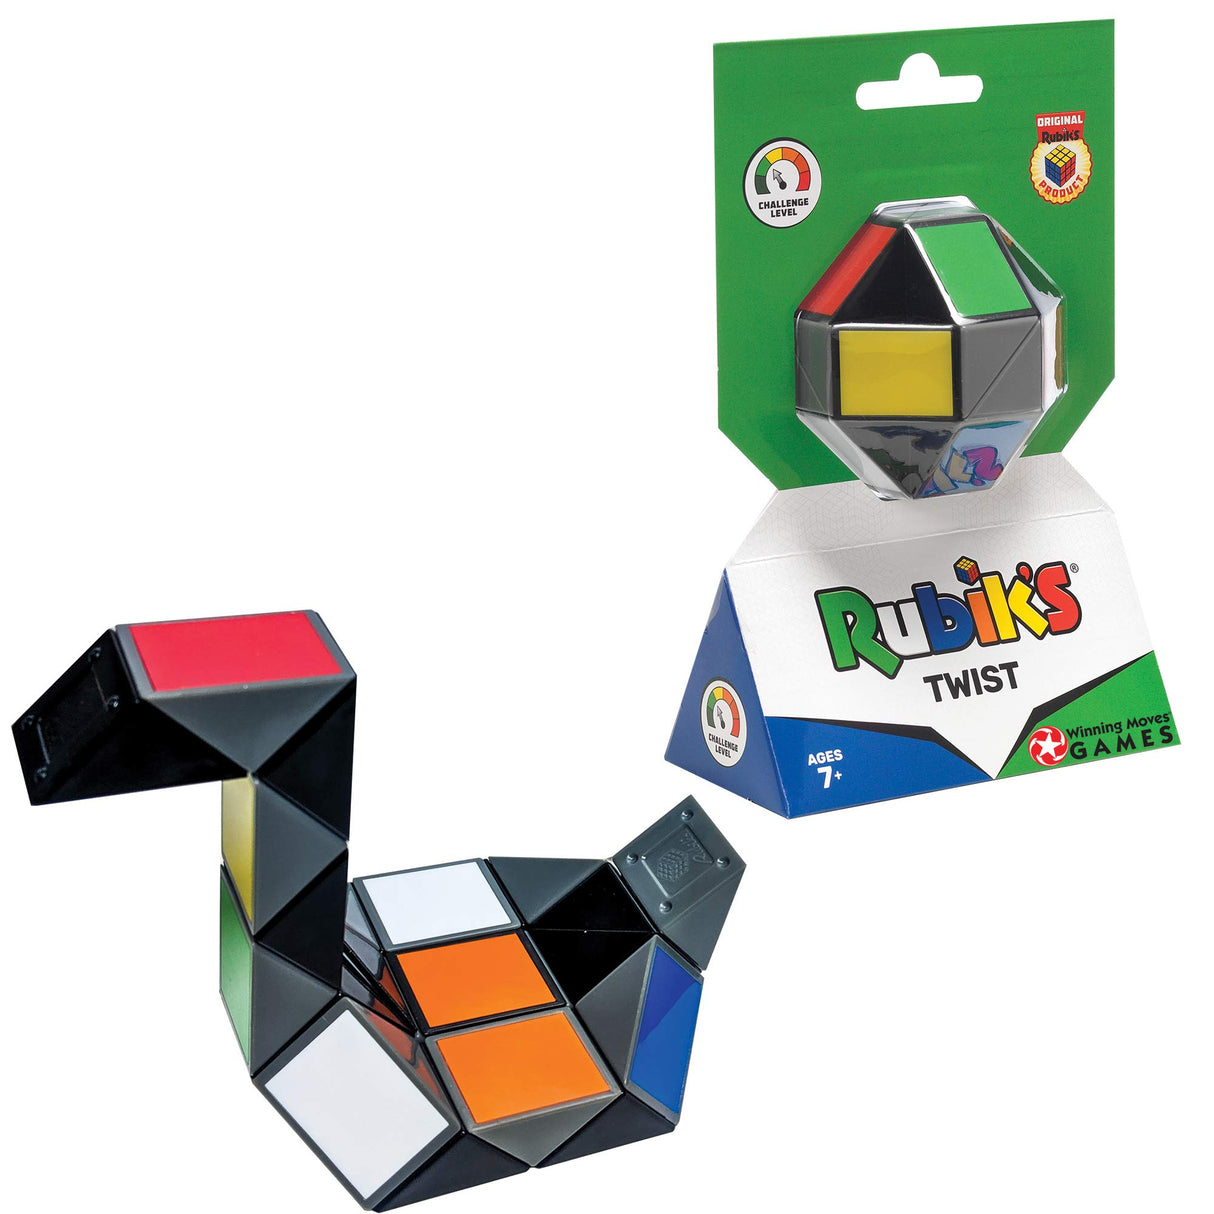 Colorful 3D puzzle cube with rotating sections, Rubik's Twist by Spin Master toy.